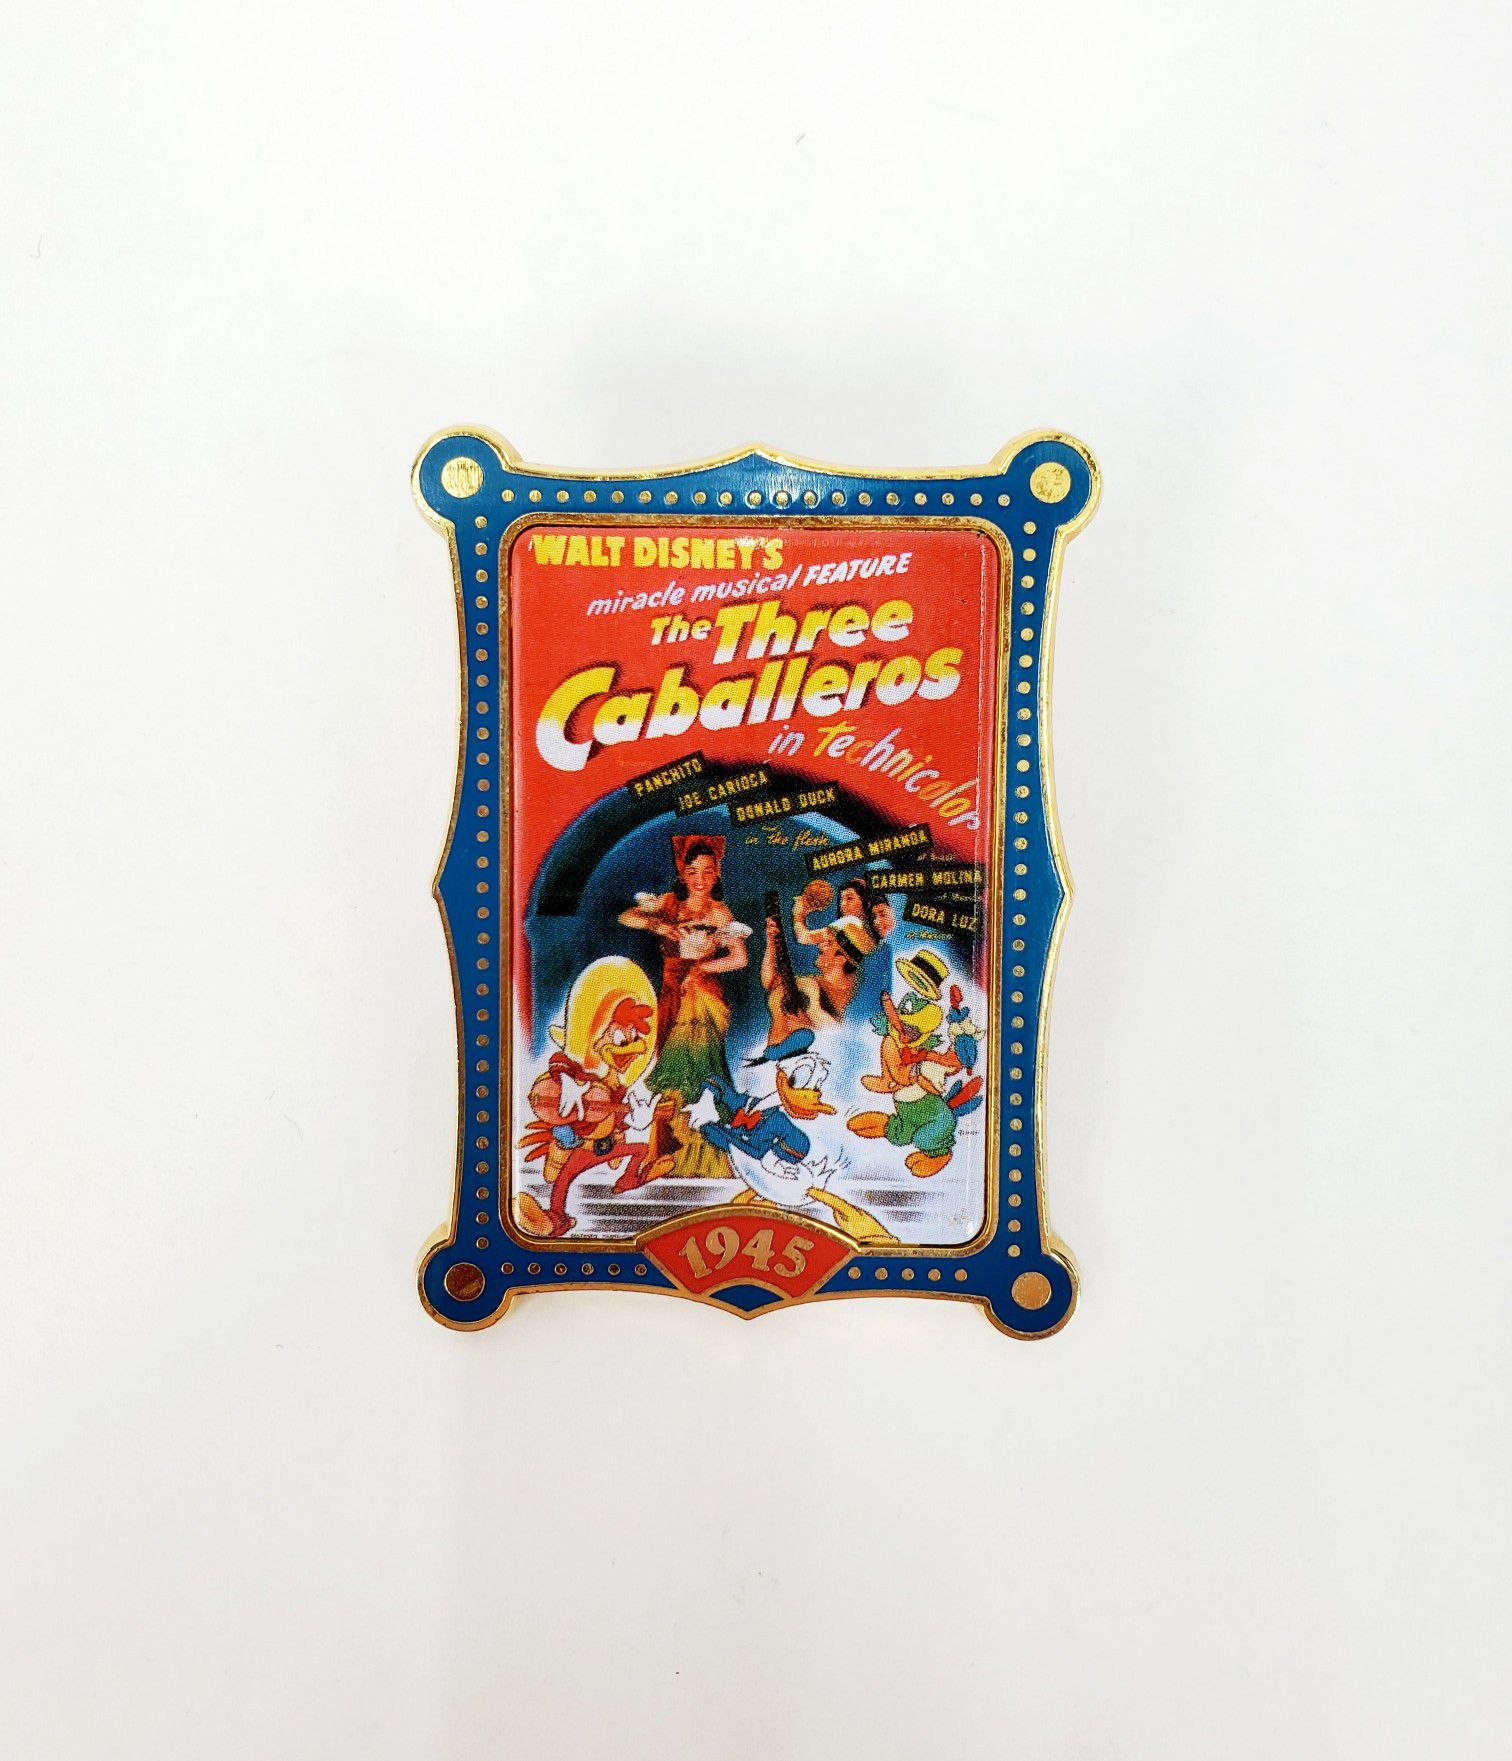 Walt Disney's Miracle Musical Feature "The Three Caballeros in Technicolor 1945" Trading Pin